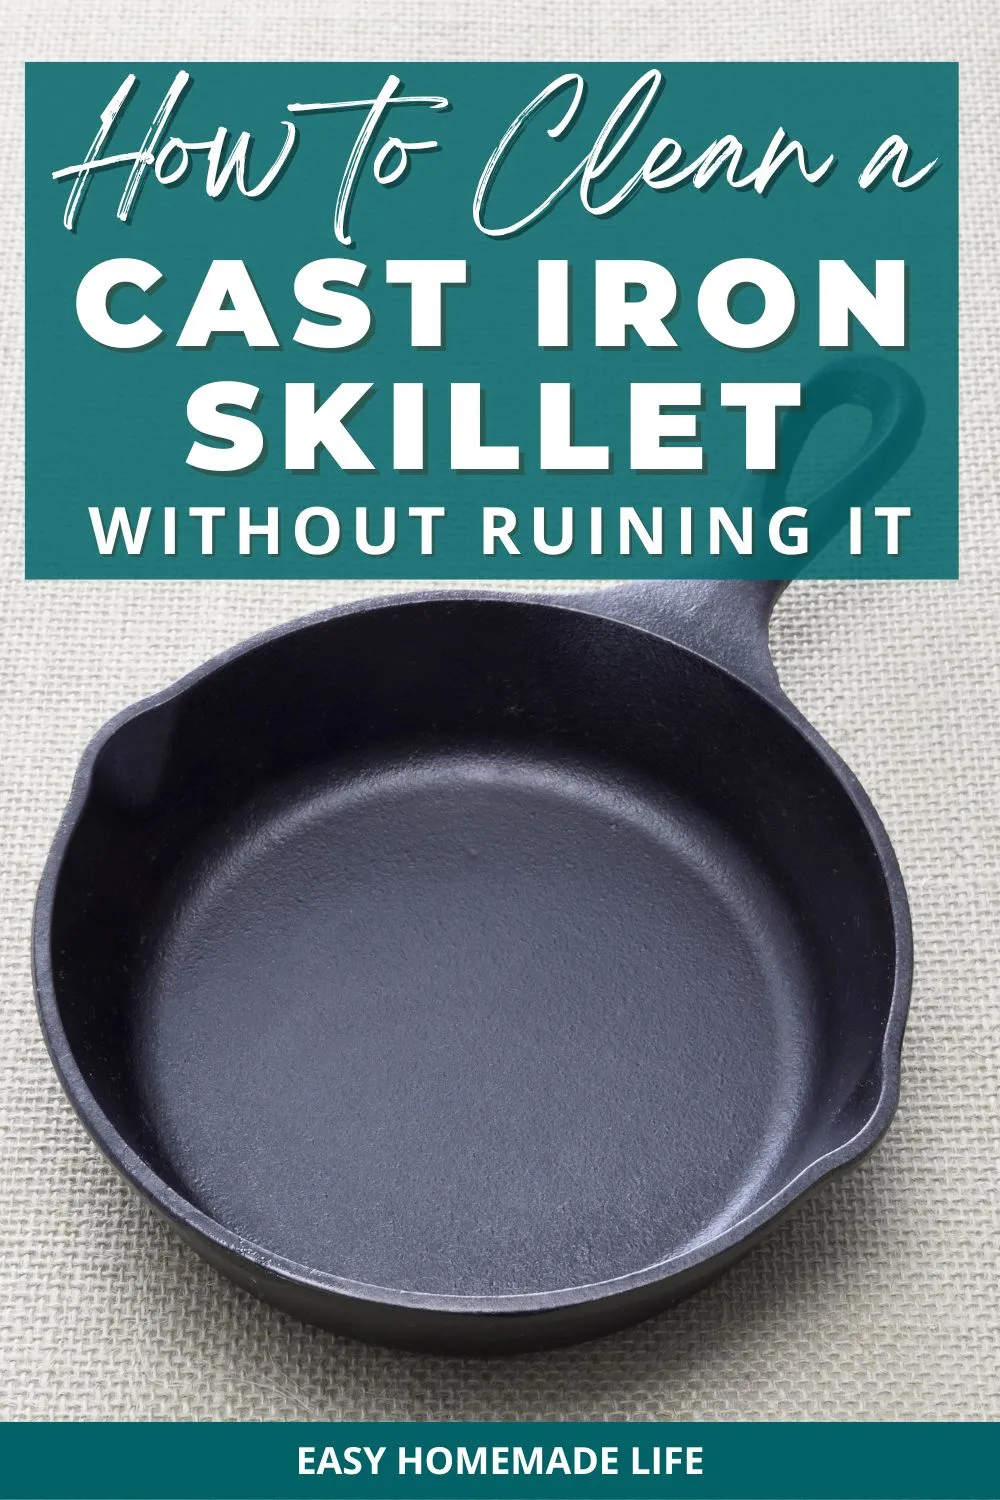 Clean cast iron fast - the simple trick to keeping it clean